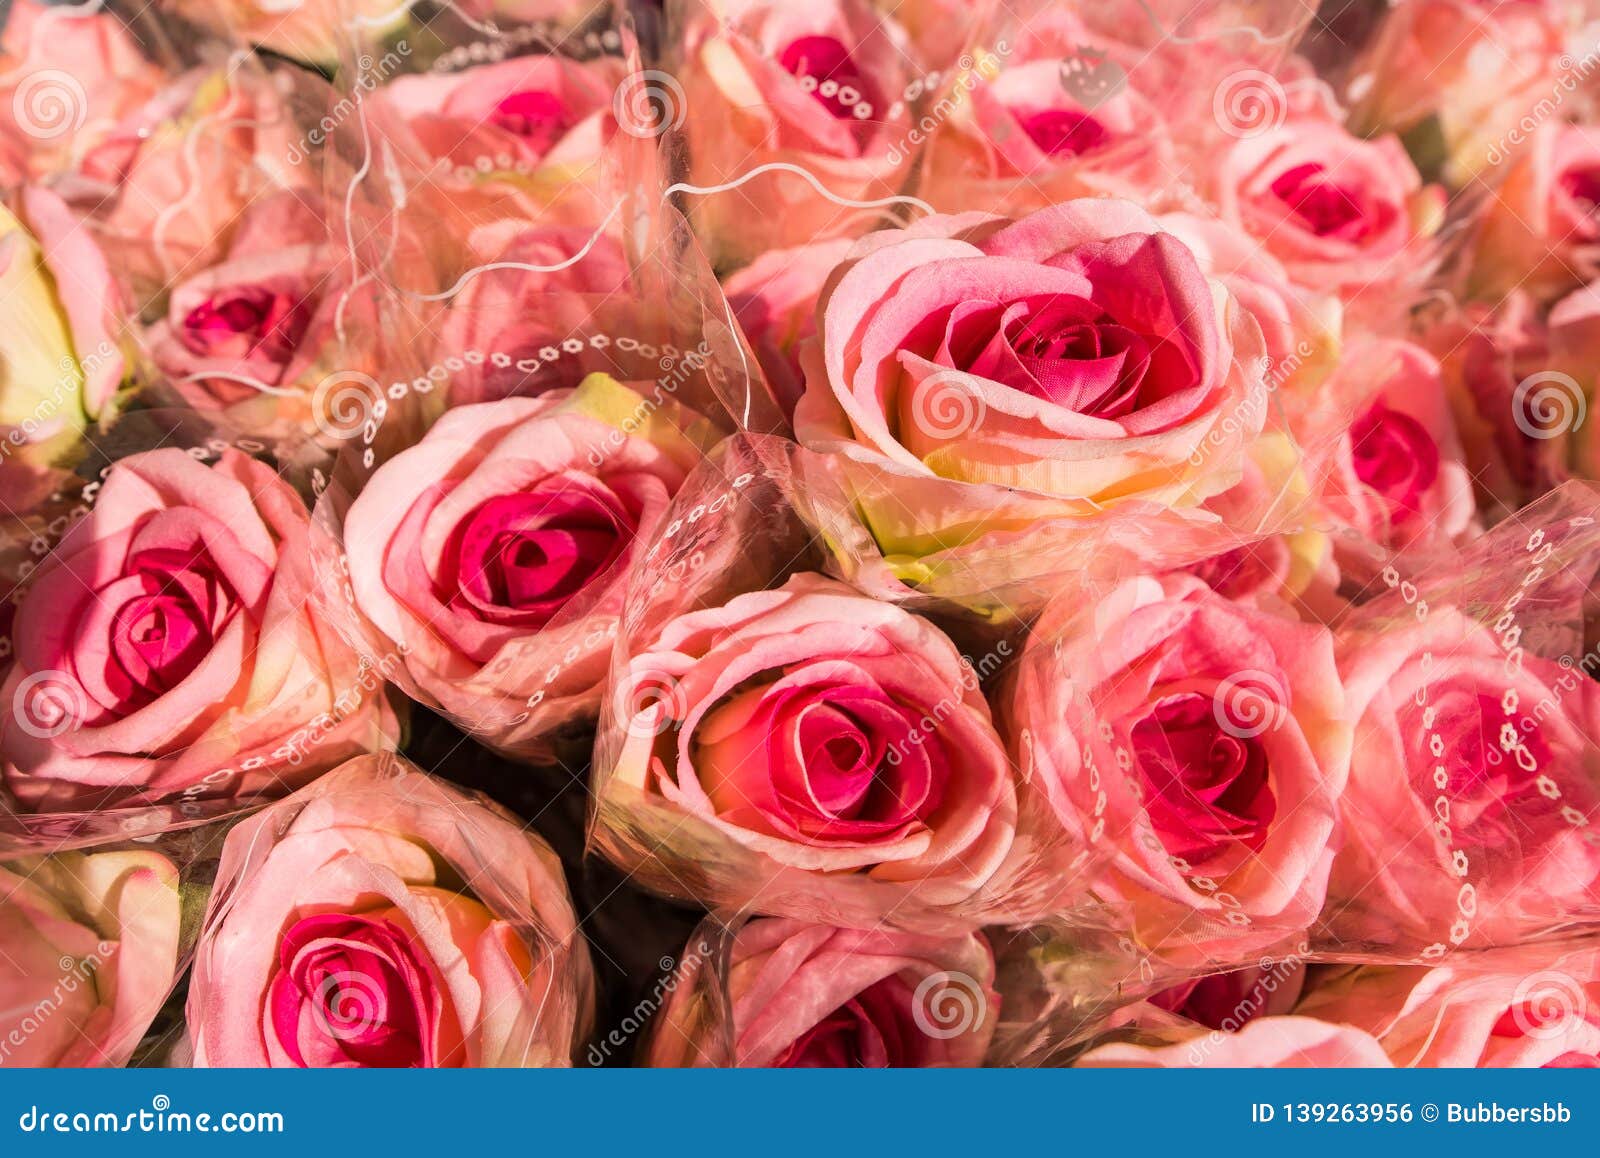 Beautiful Bouquet Close Up a Rose in Shop.Thailand Stock Photo - Image of colorful, beautiful: 139263956